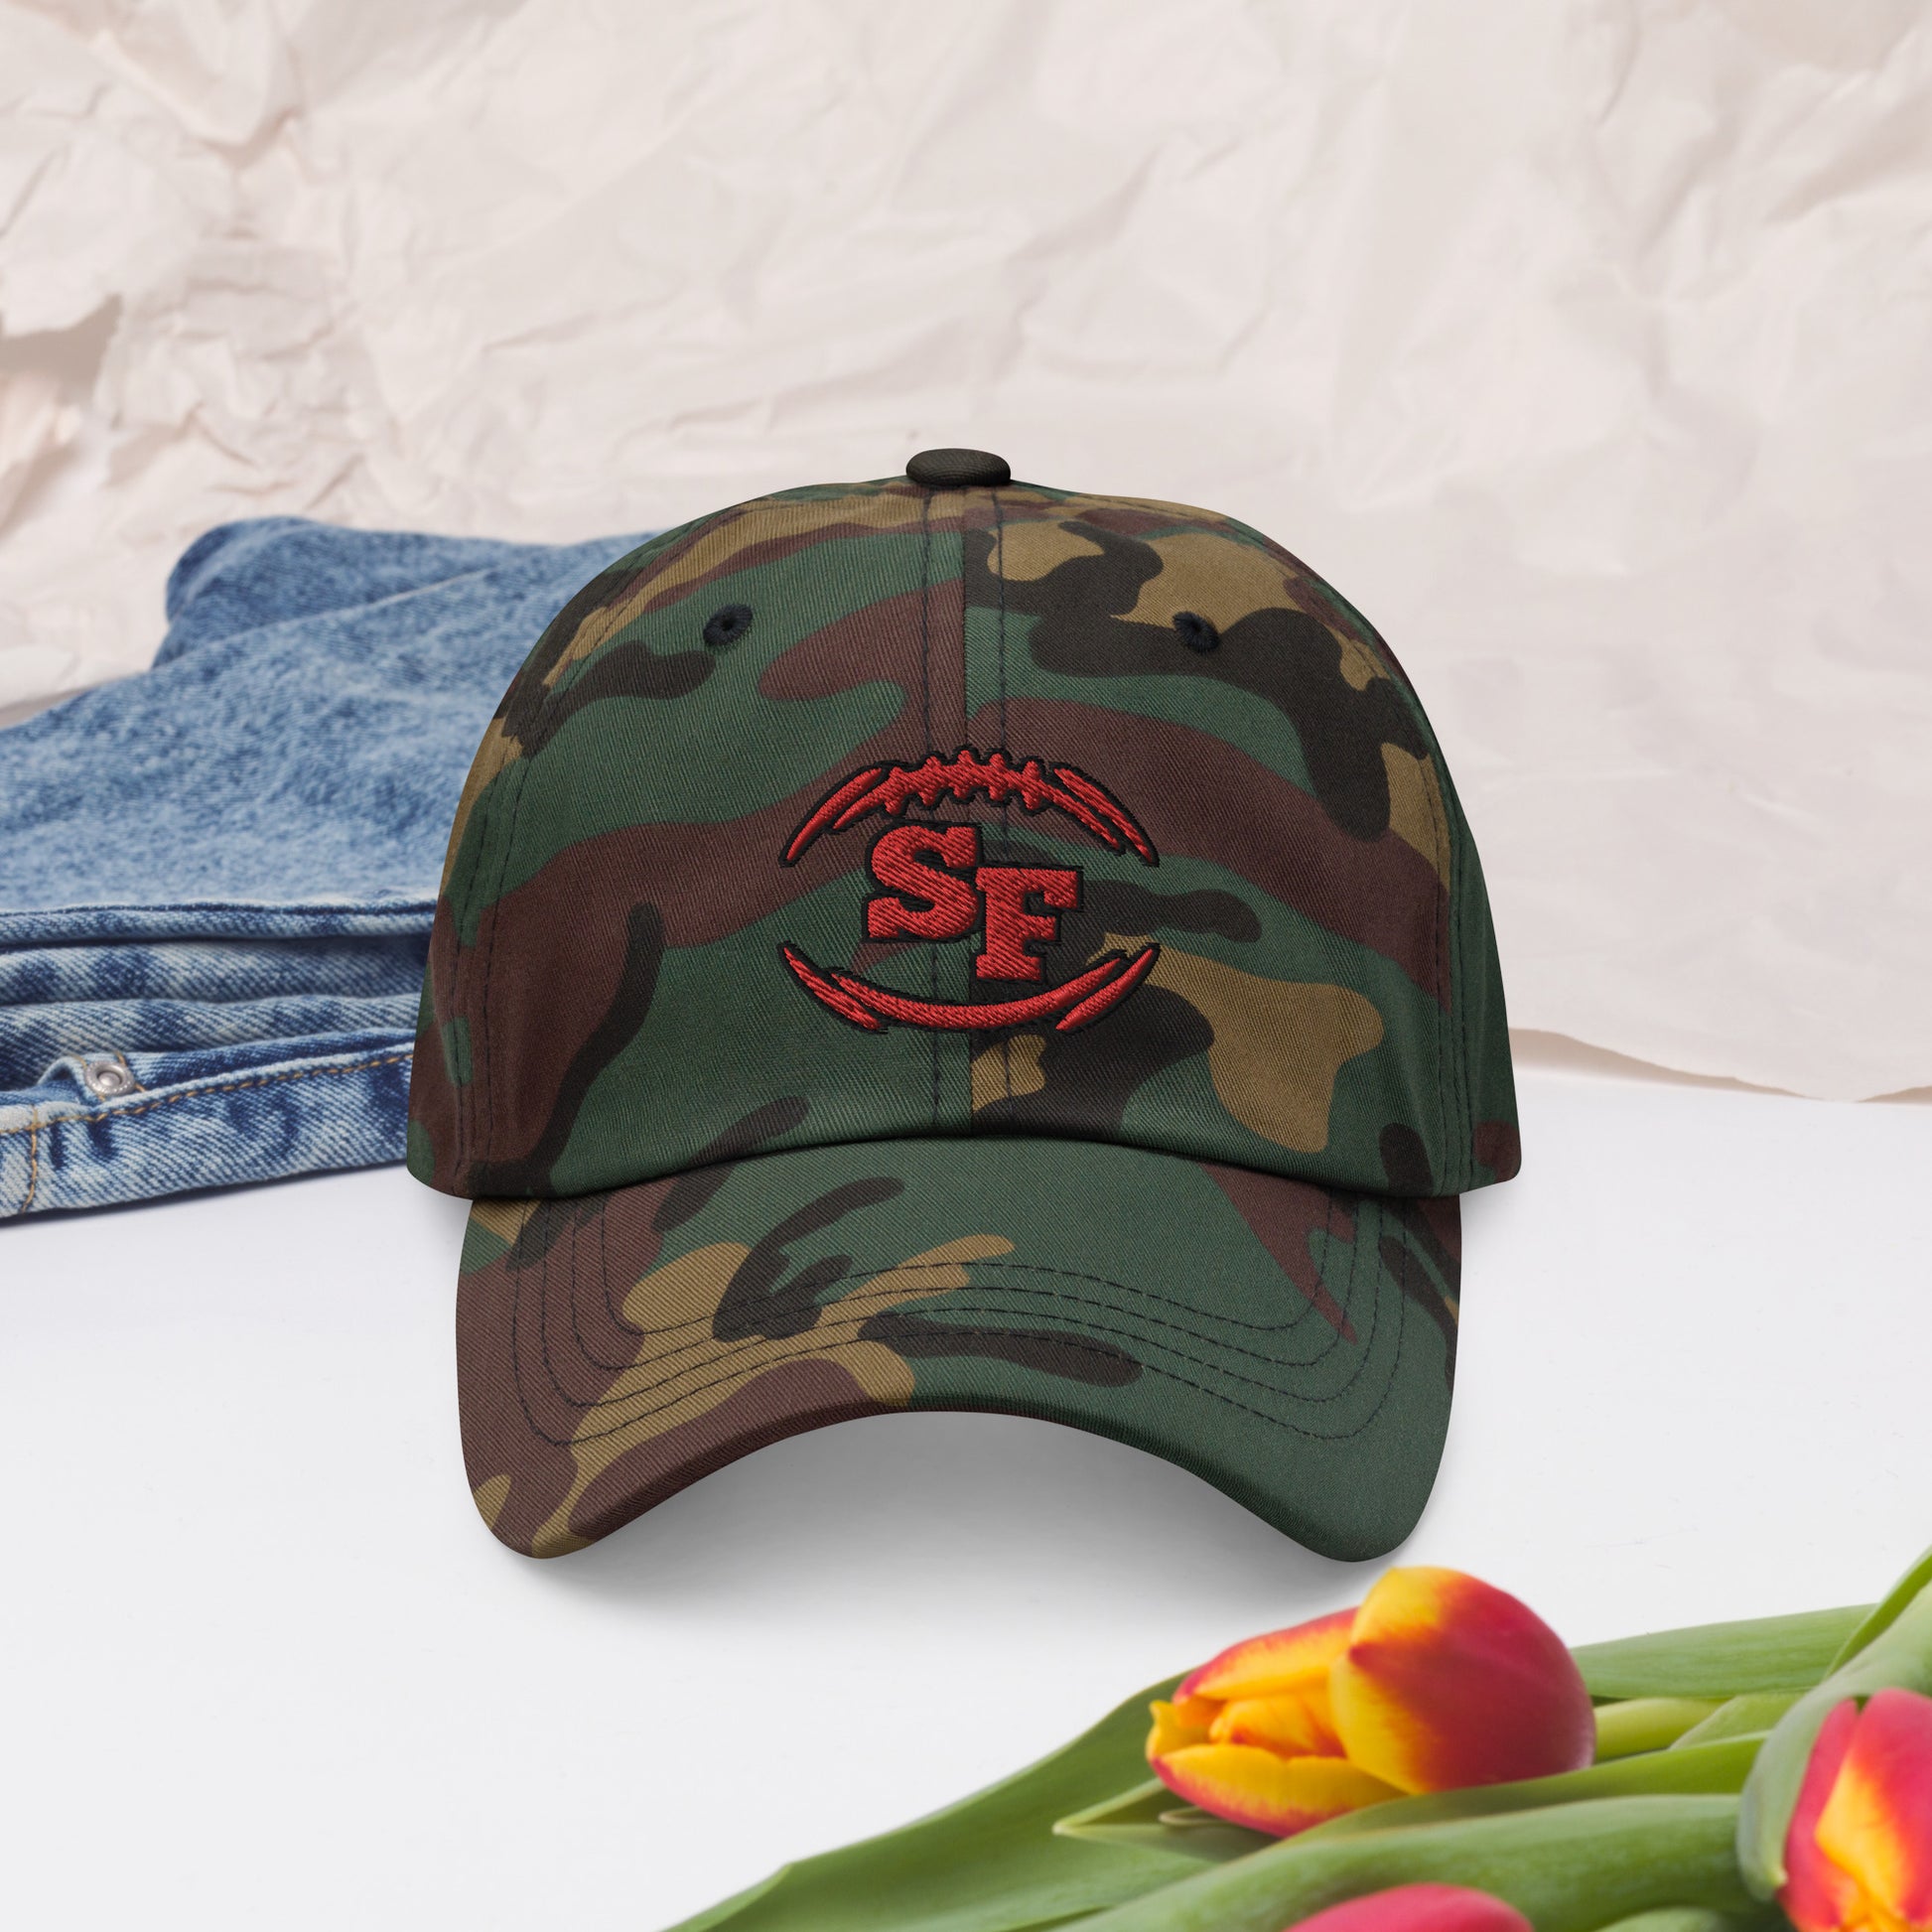 49ers camo fitted hat